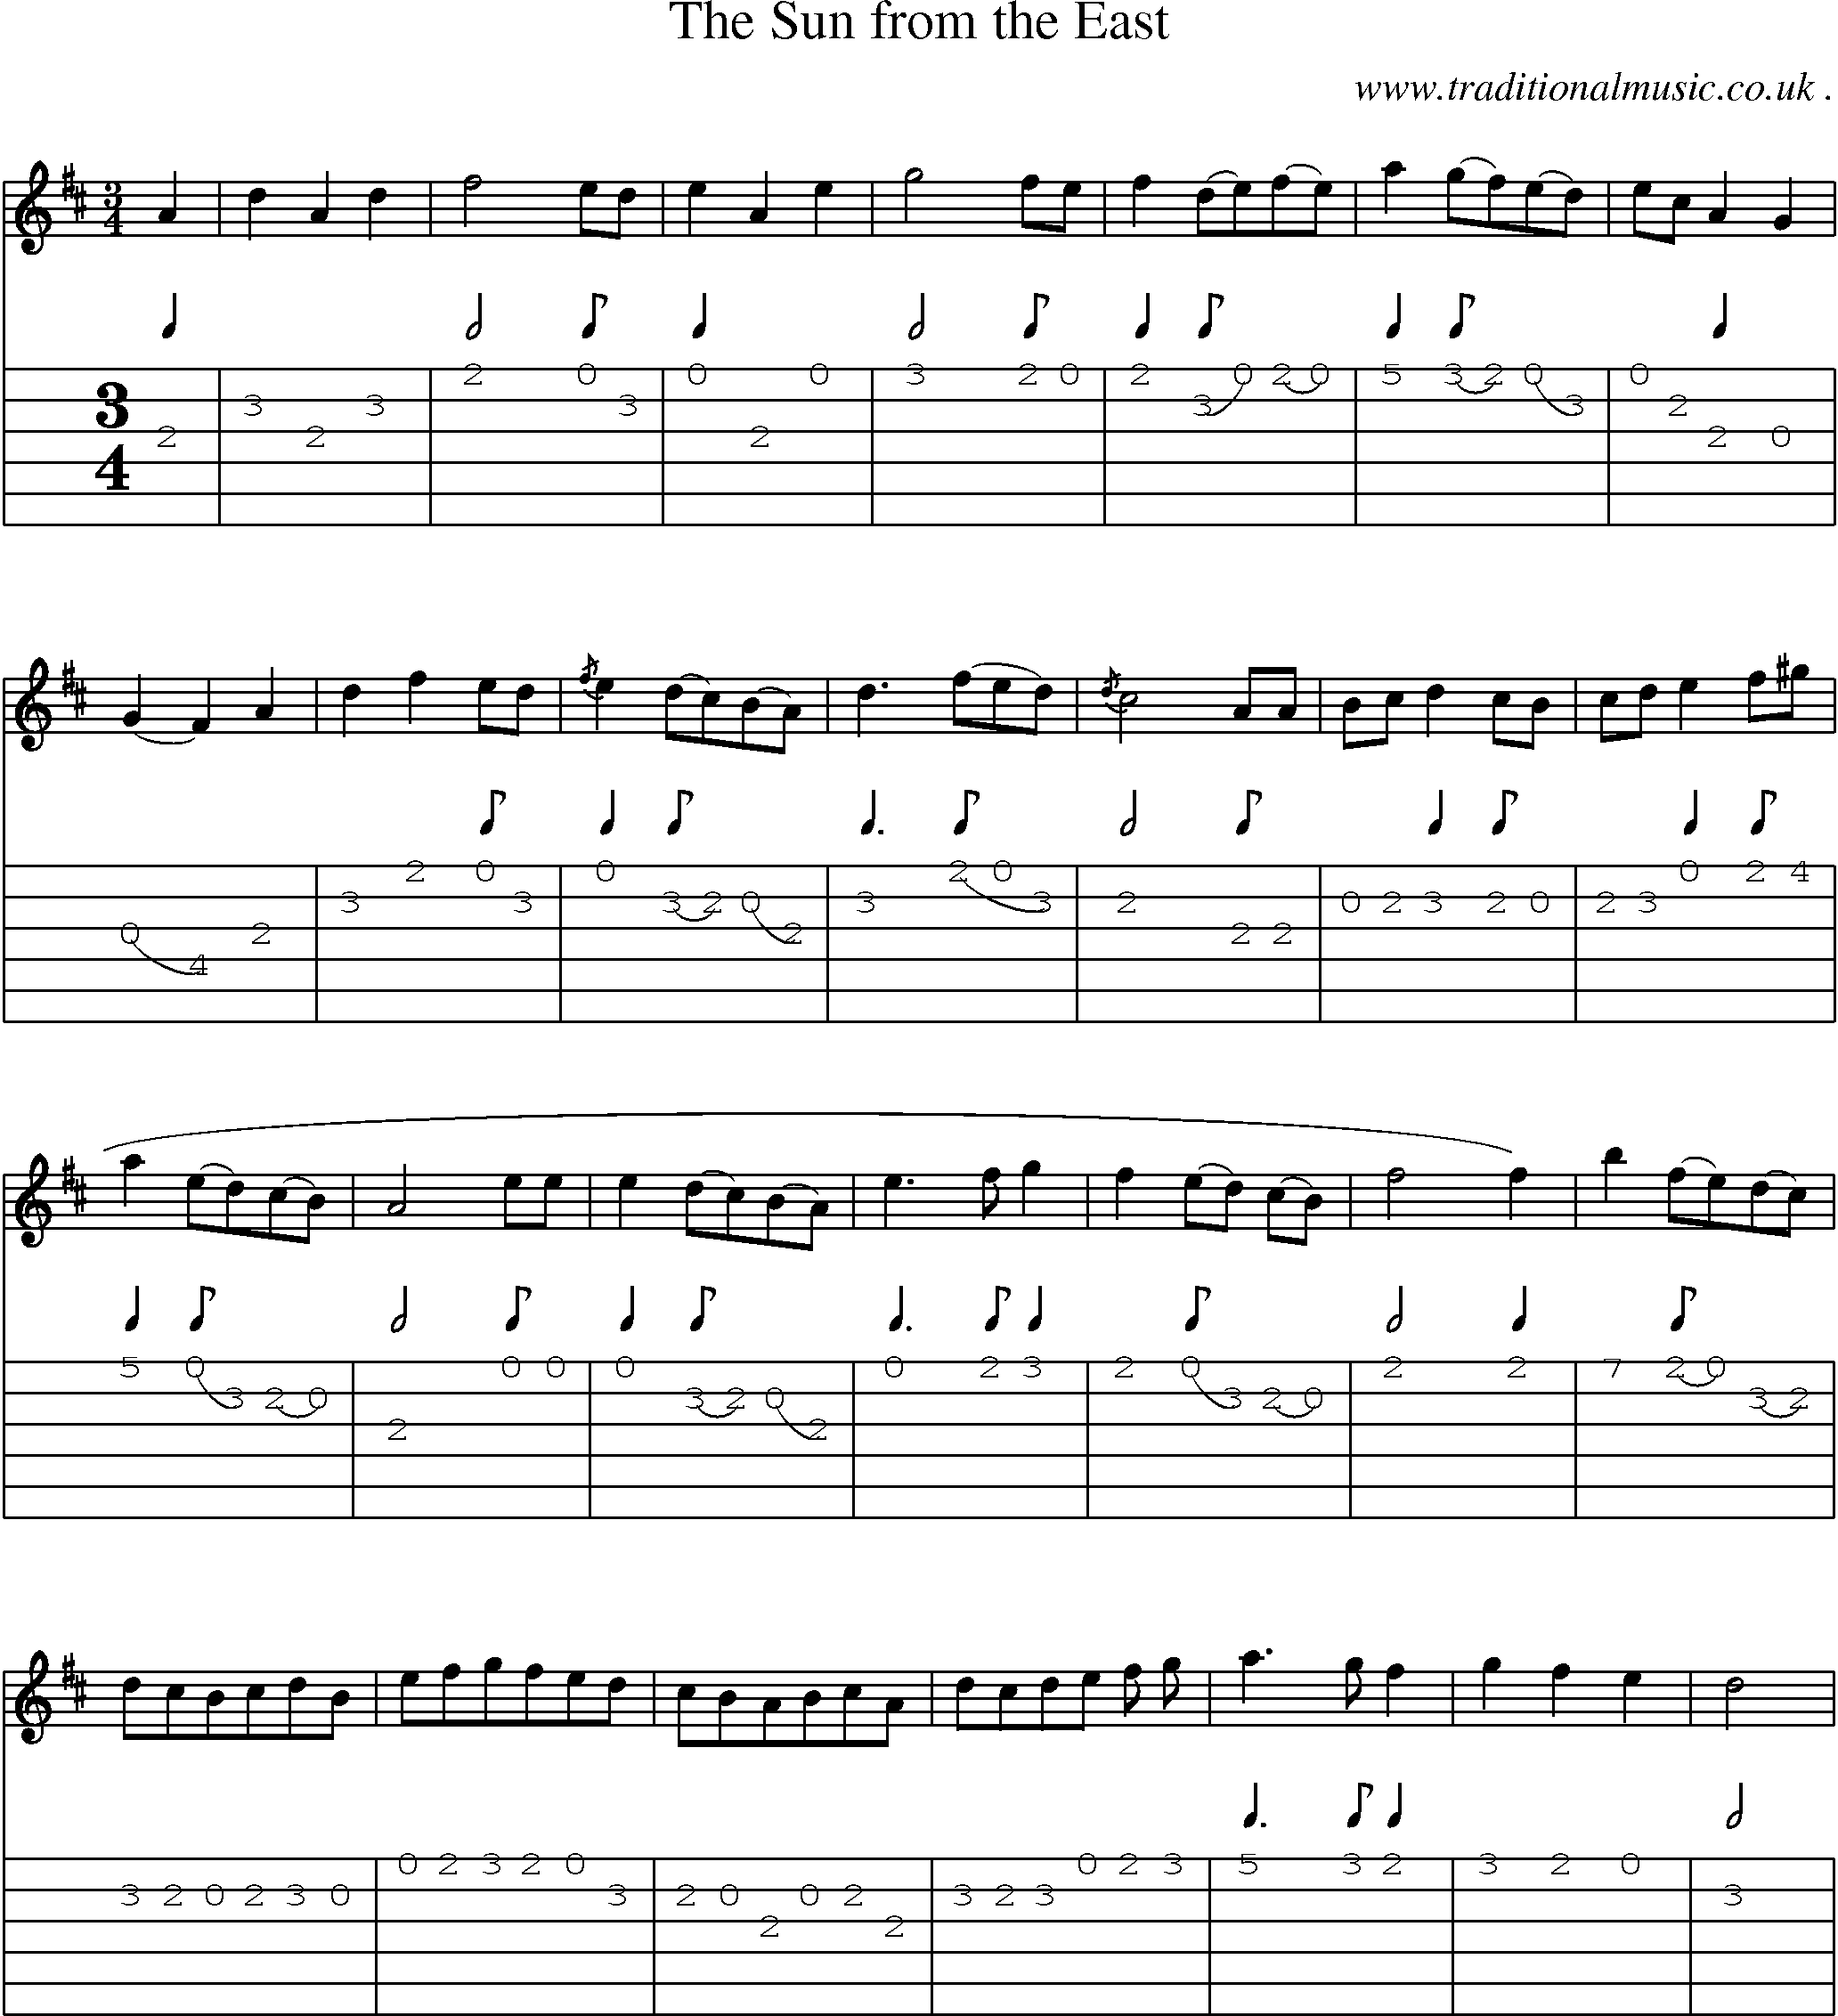 Sheet-music  score, Chords and Guitar Tabs for The Sun From The East